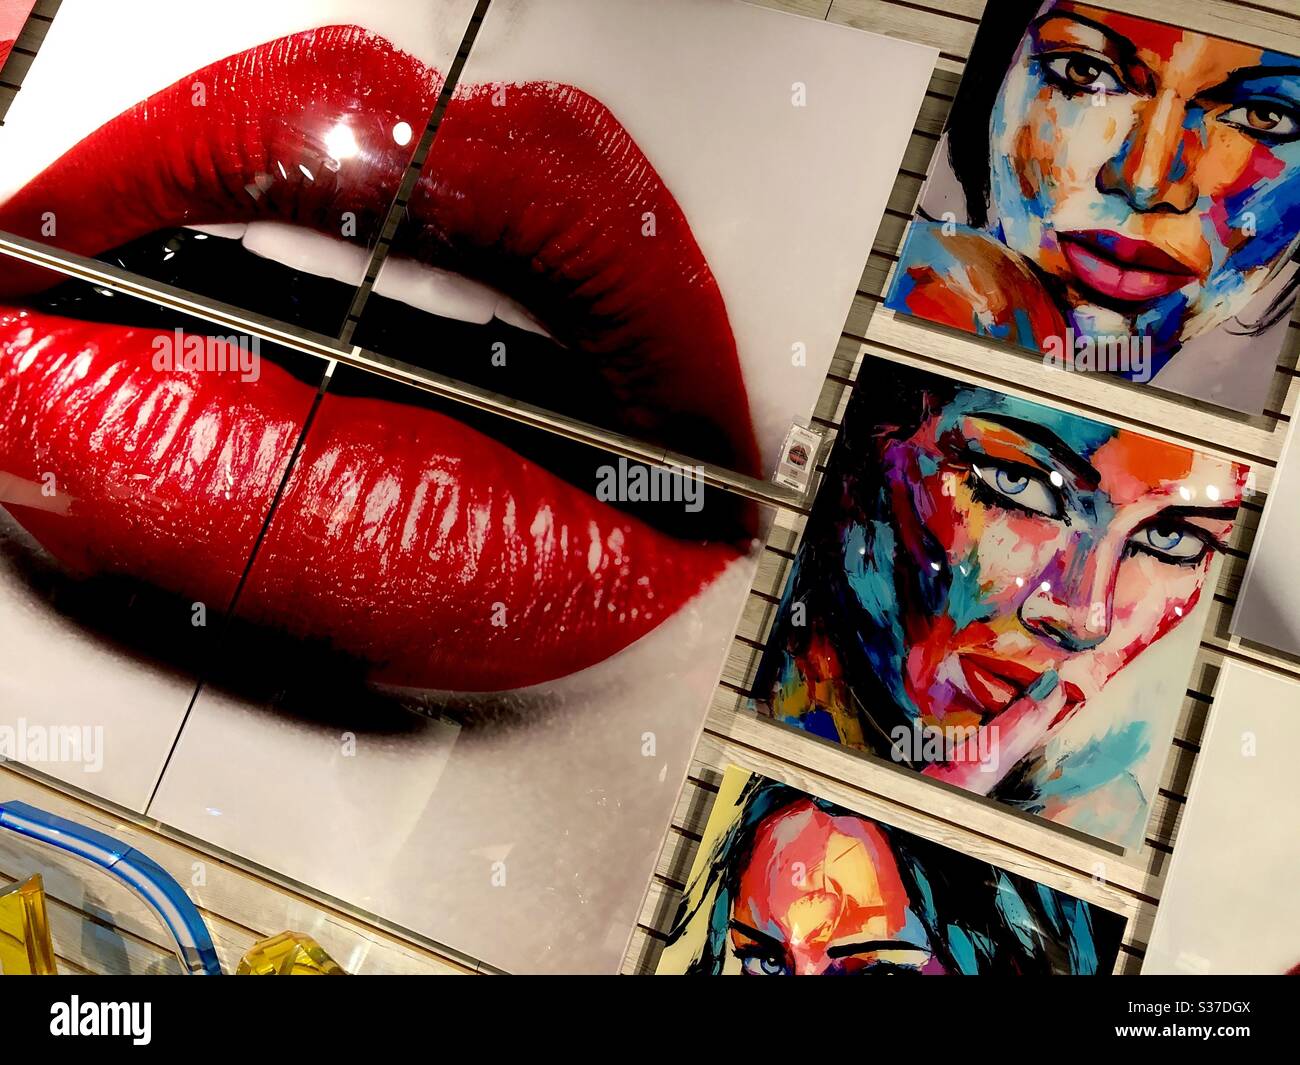 Modern artwork in a furniture showroom of a woman’s mouth with red lipstick and several abstract portraits. Stock Photo